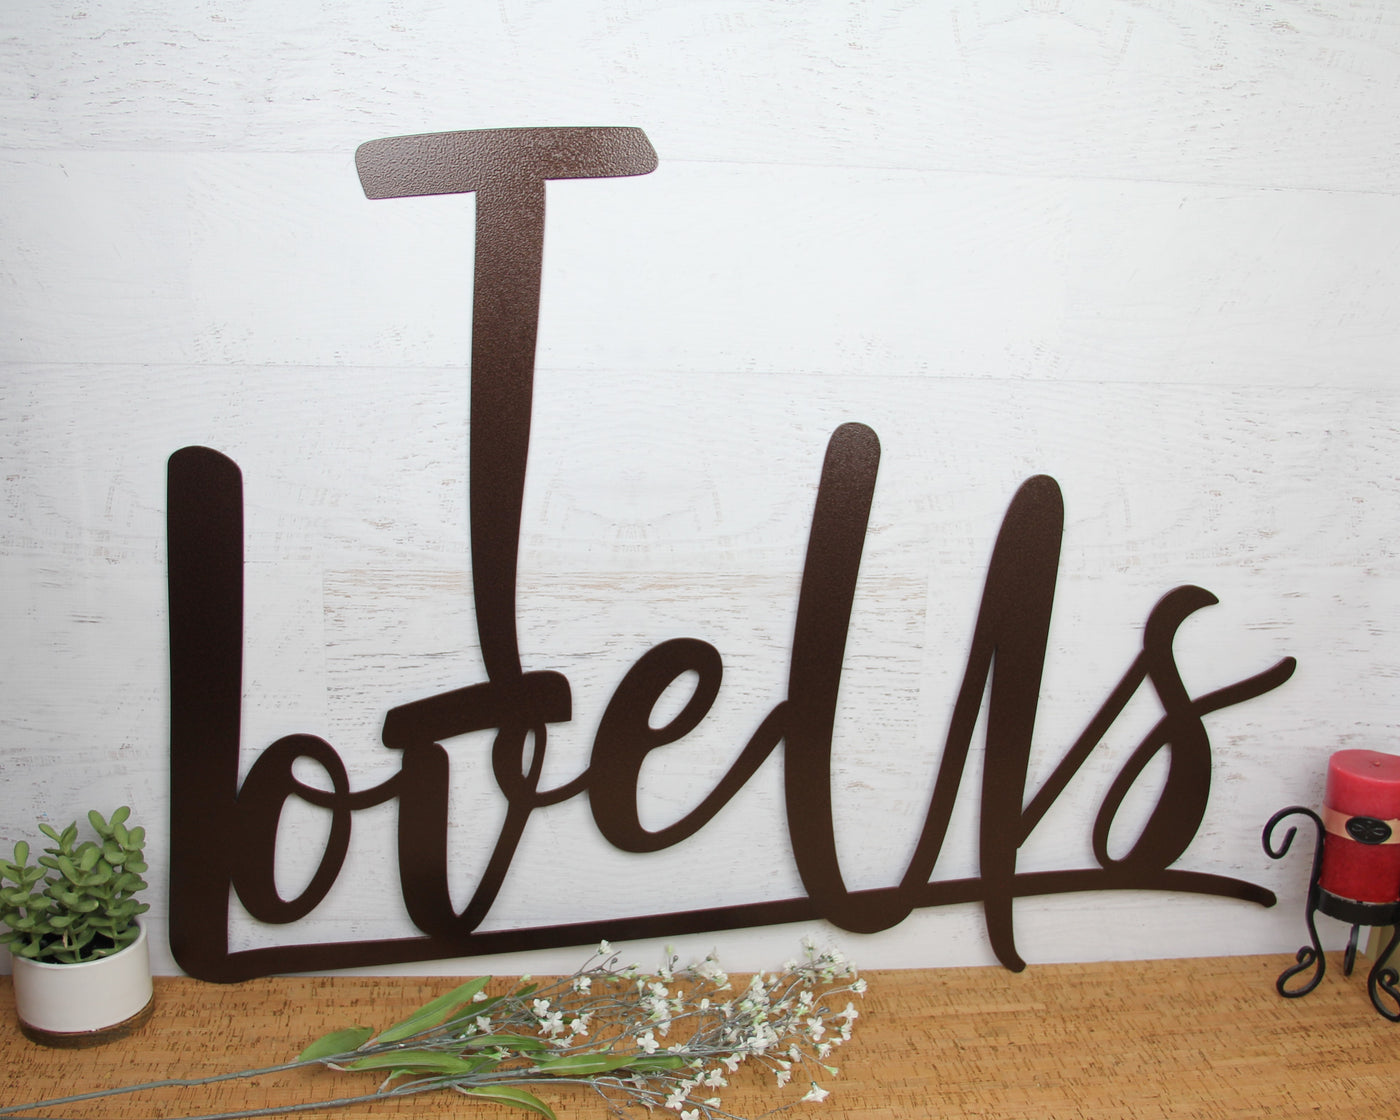 I Love Us Metal Word Sign - Madison Iron and Wood - Wall Art - metal outdoor decor - Steel deocrations - american made products - veteran owned business products - fencing decorations - fencing supplies - custom wall decorations - personalized wall signs - steel - decorative post caps - steel post caps - metal post caps - brackets - structural brackets - home improvement - easter - easter decorations - easter gift - easter yard decor